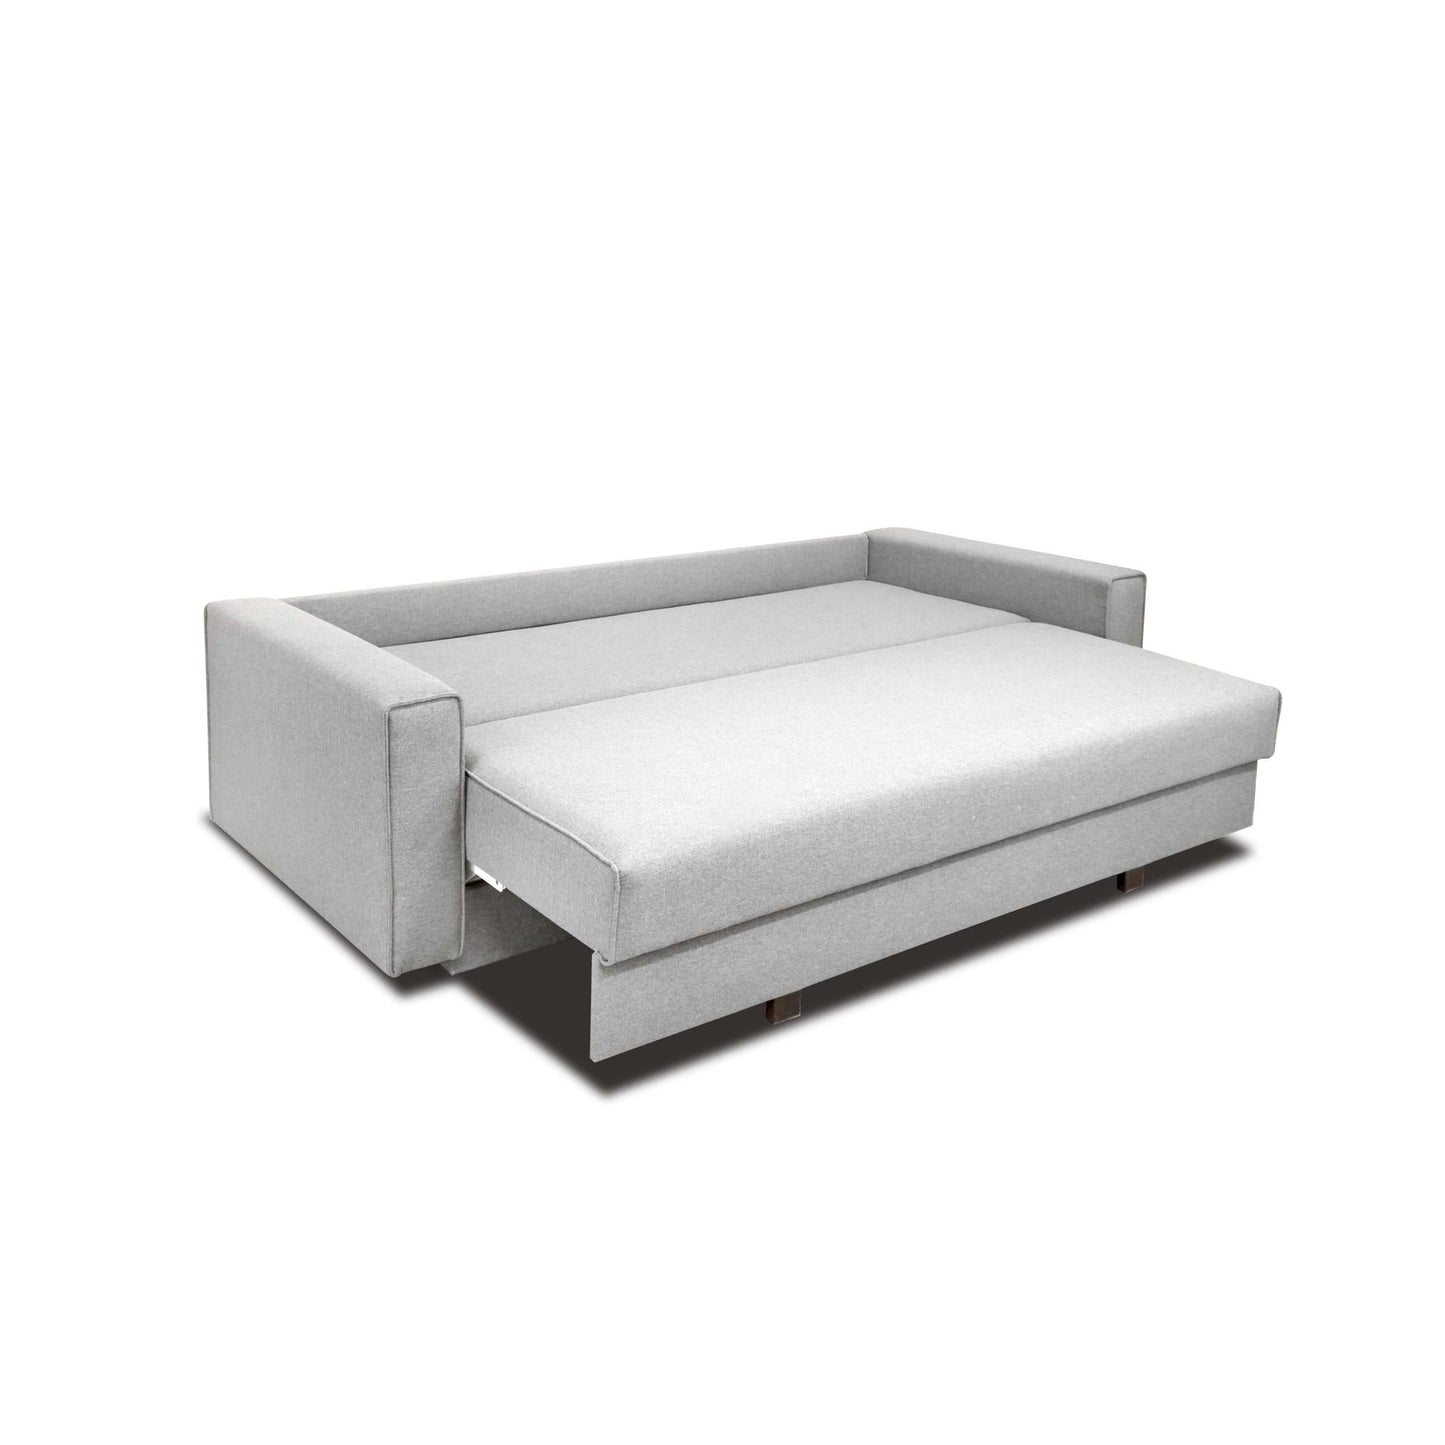 Country Modern Sofa Bed Sleeper in Marble